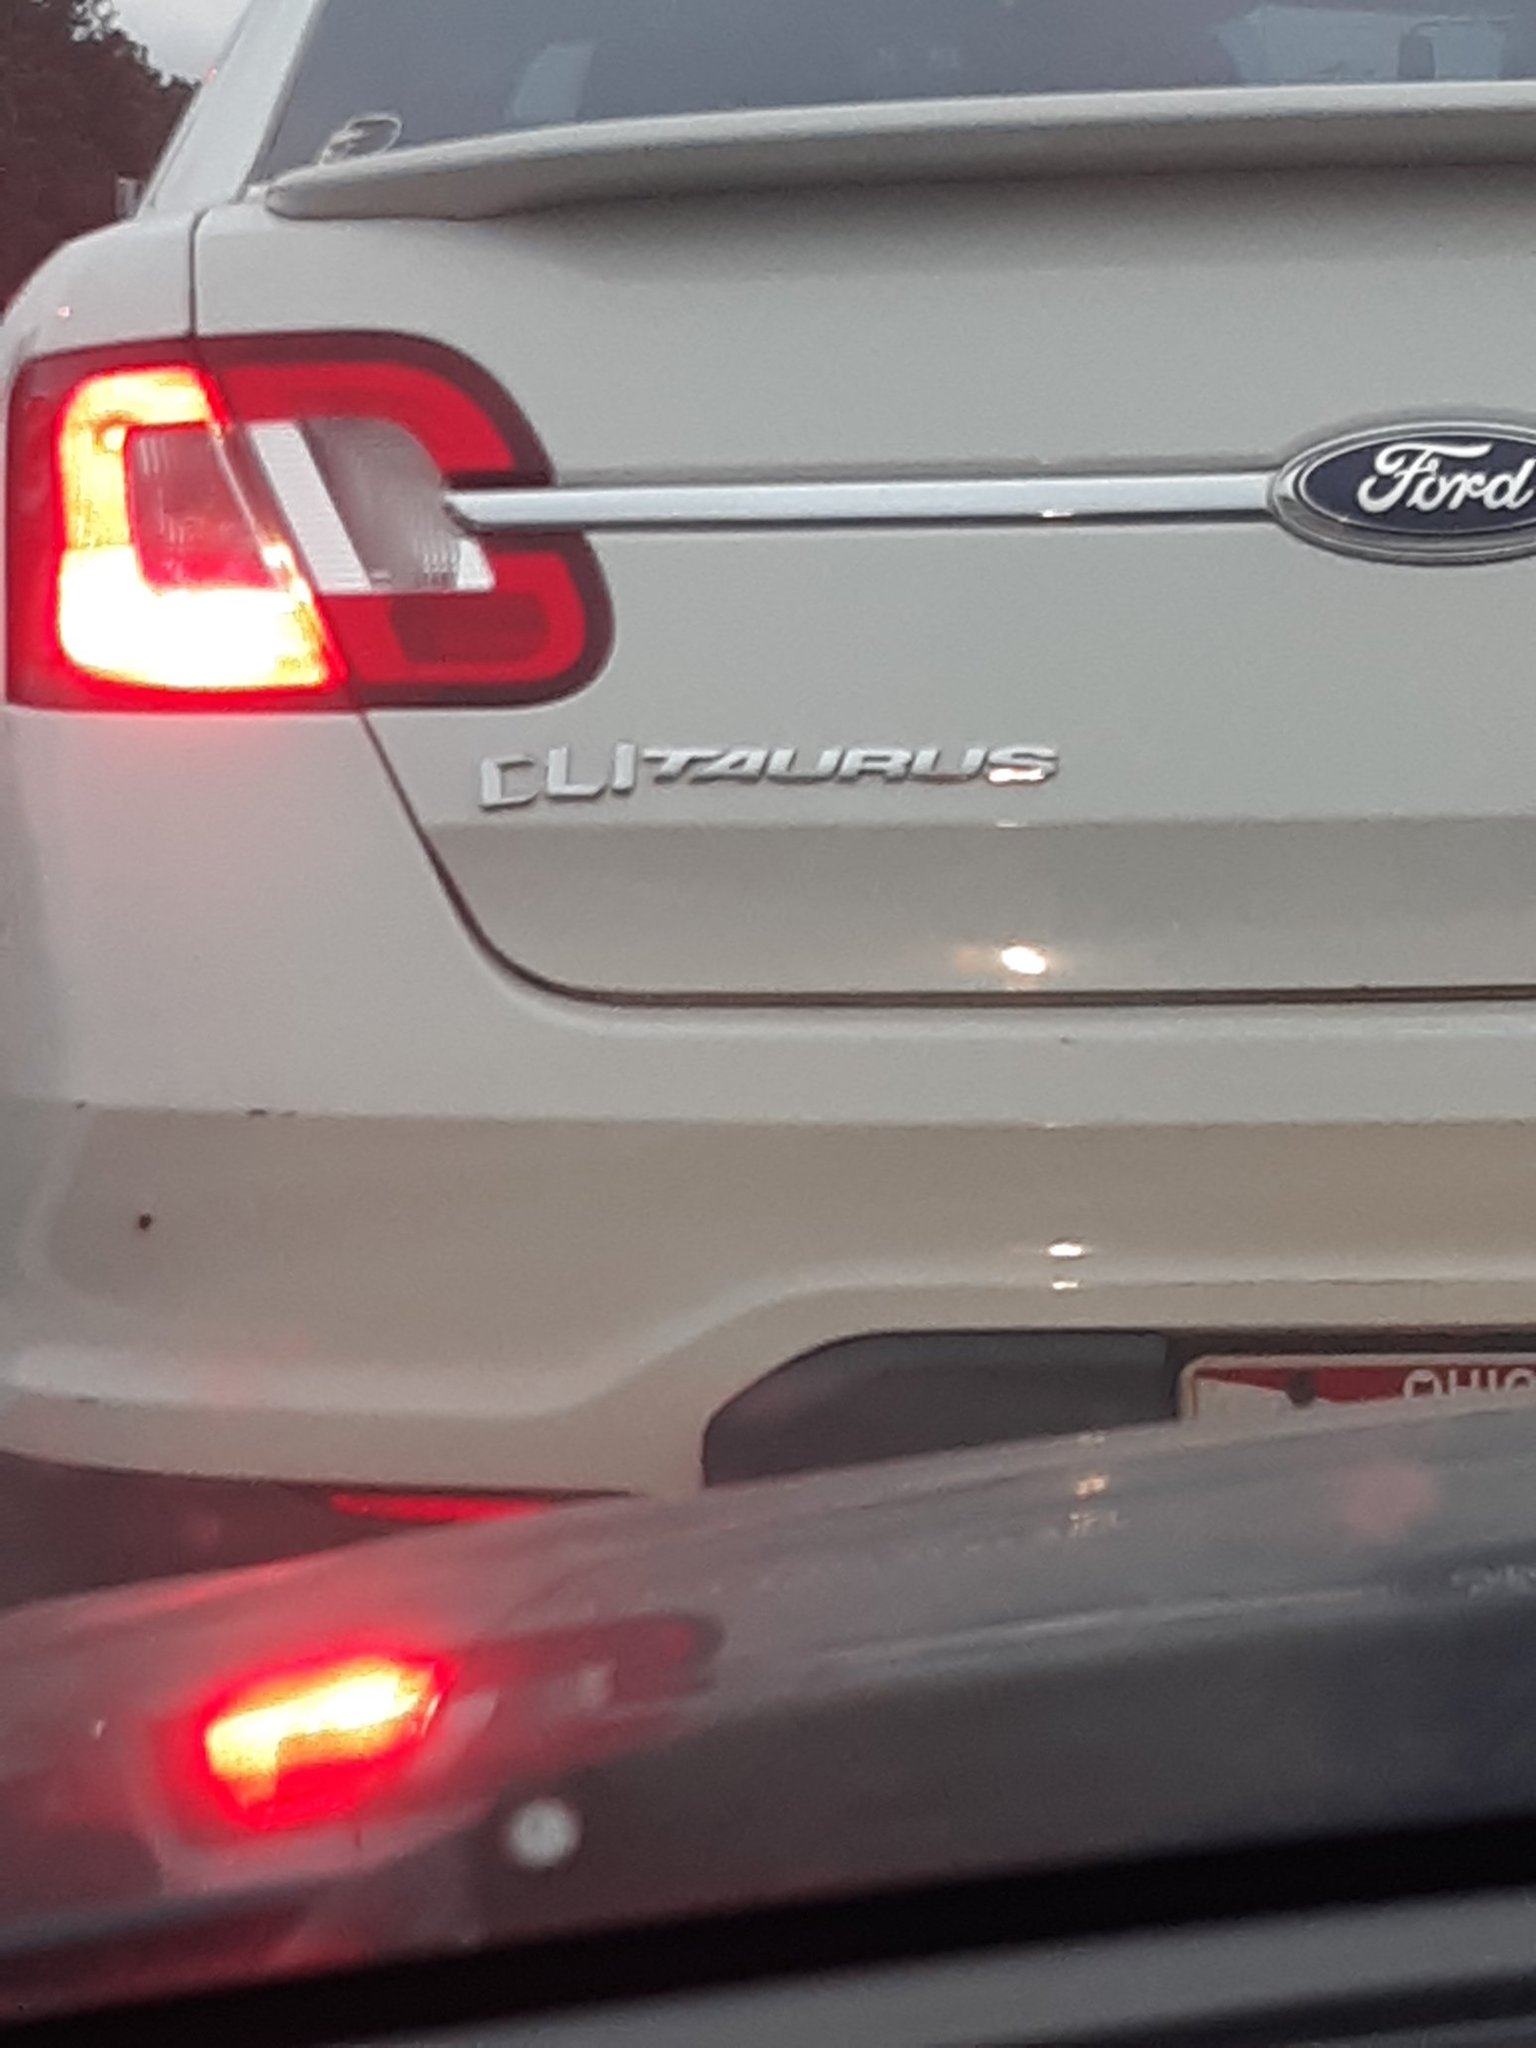 This gem was just in front of me at a light. - meme